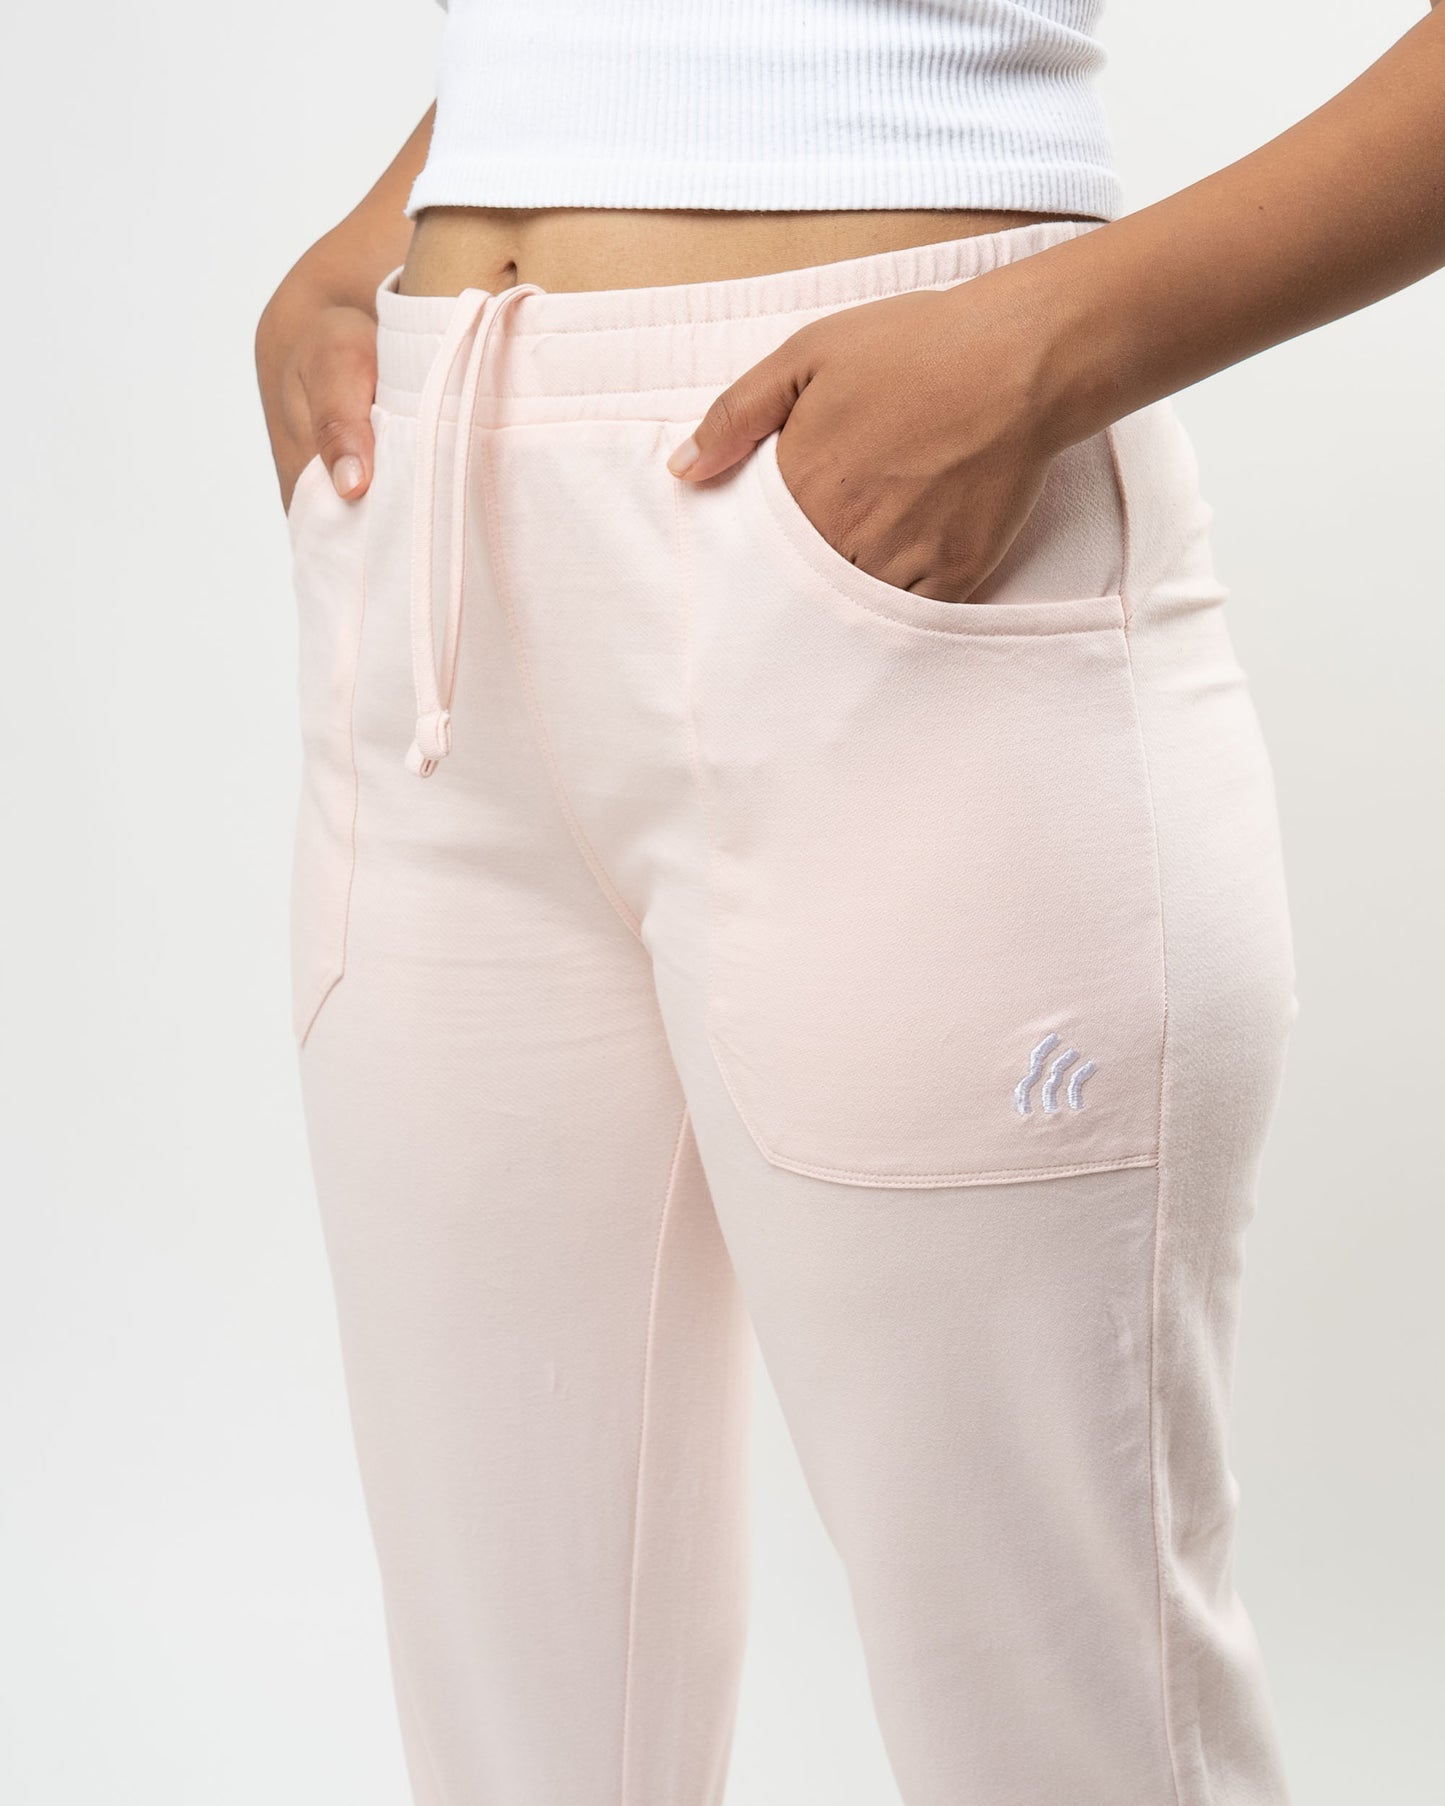 Cotton pants for women with pockets